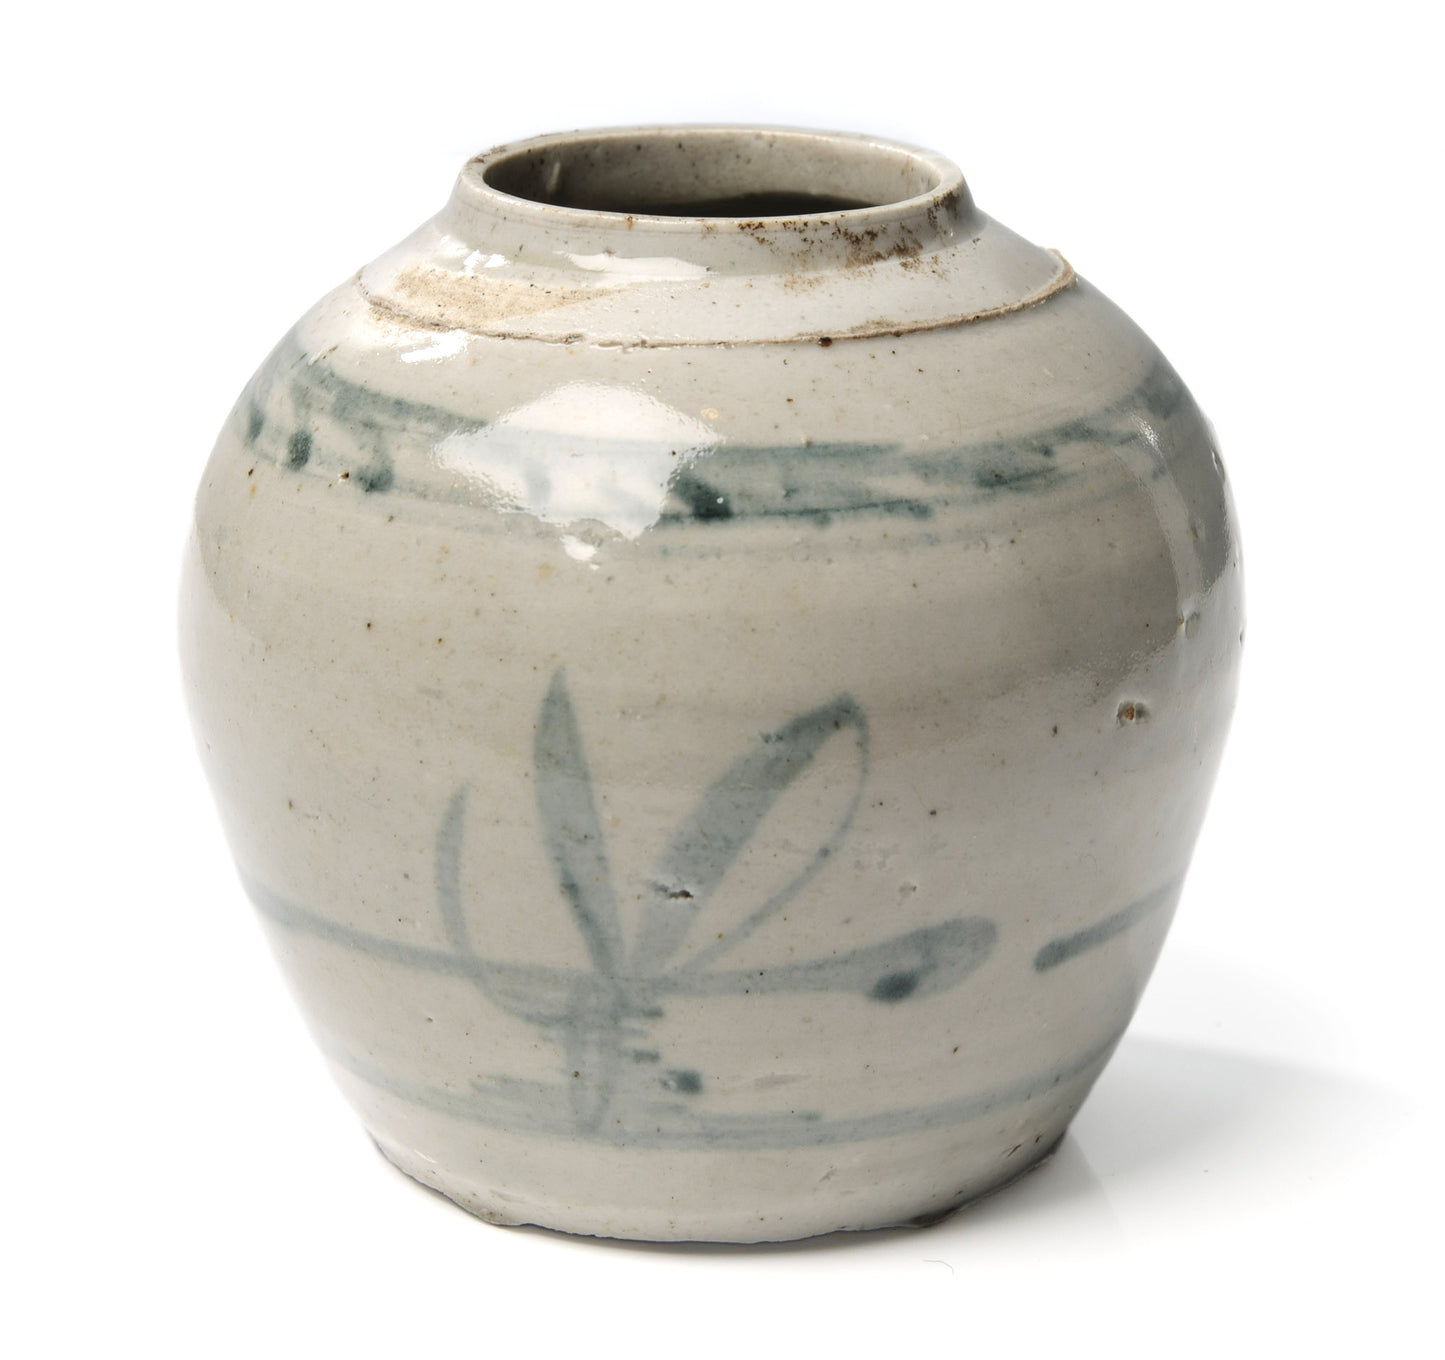 Antique Chinese Late Ming Period Stoneware Storage Jar with Brush Stroke Design (Code 1051)